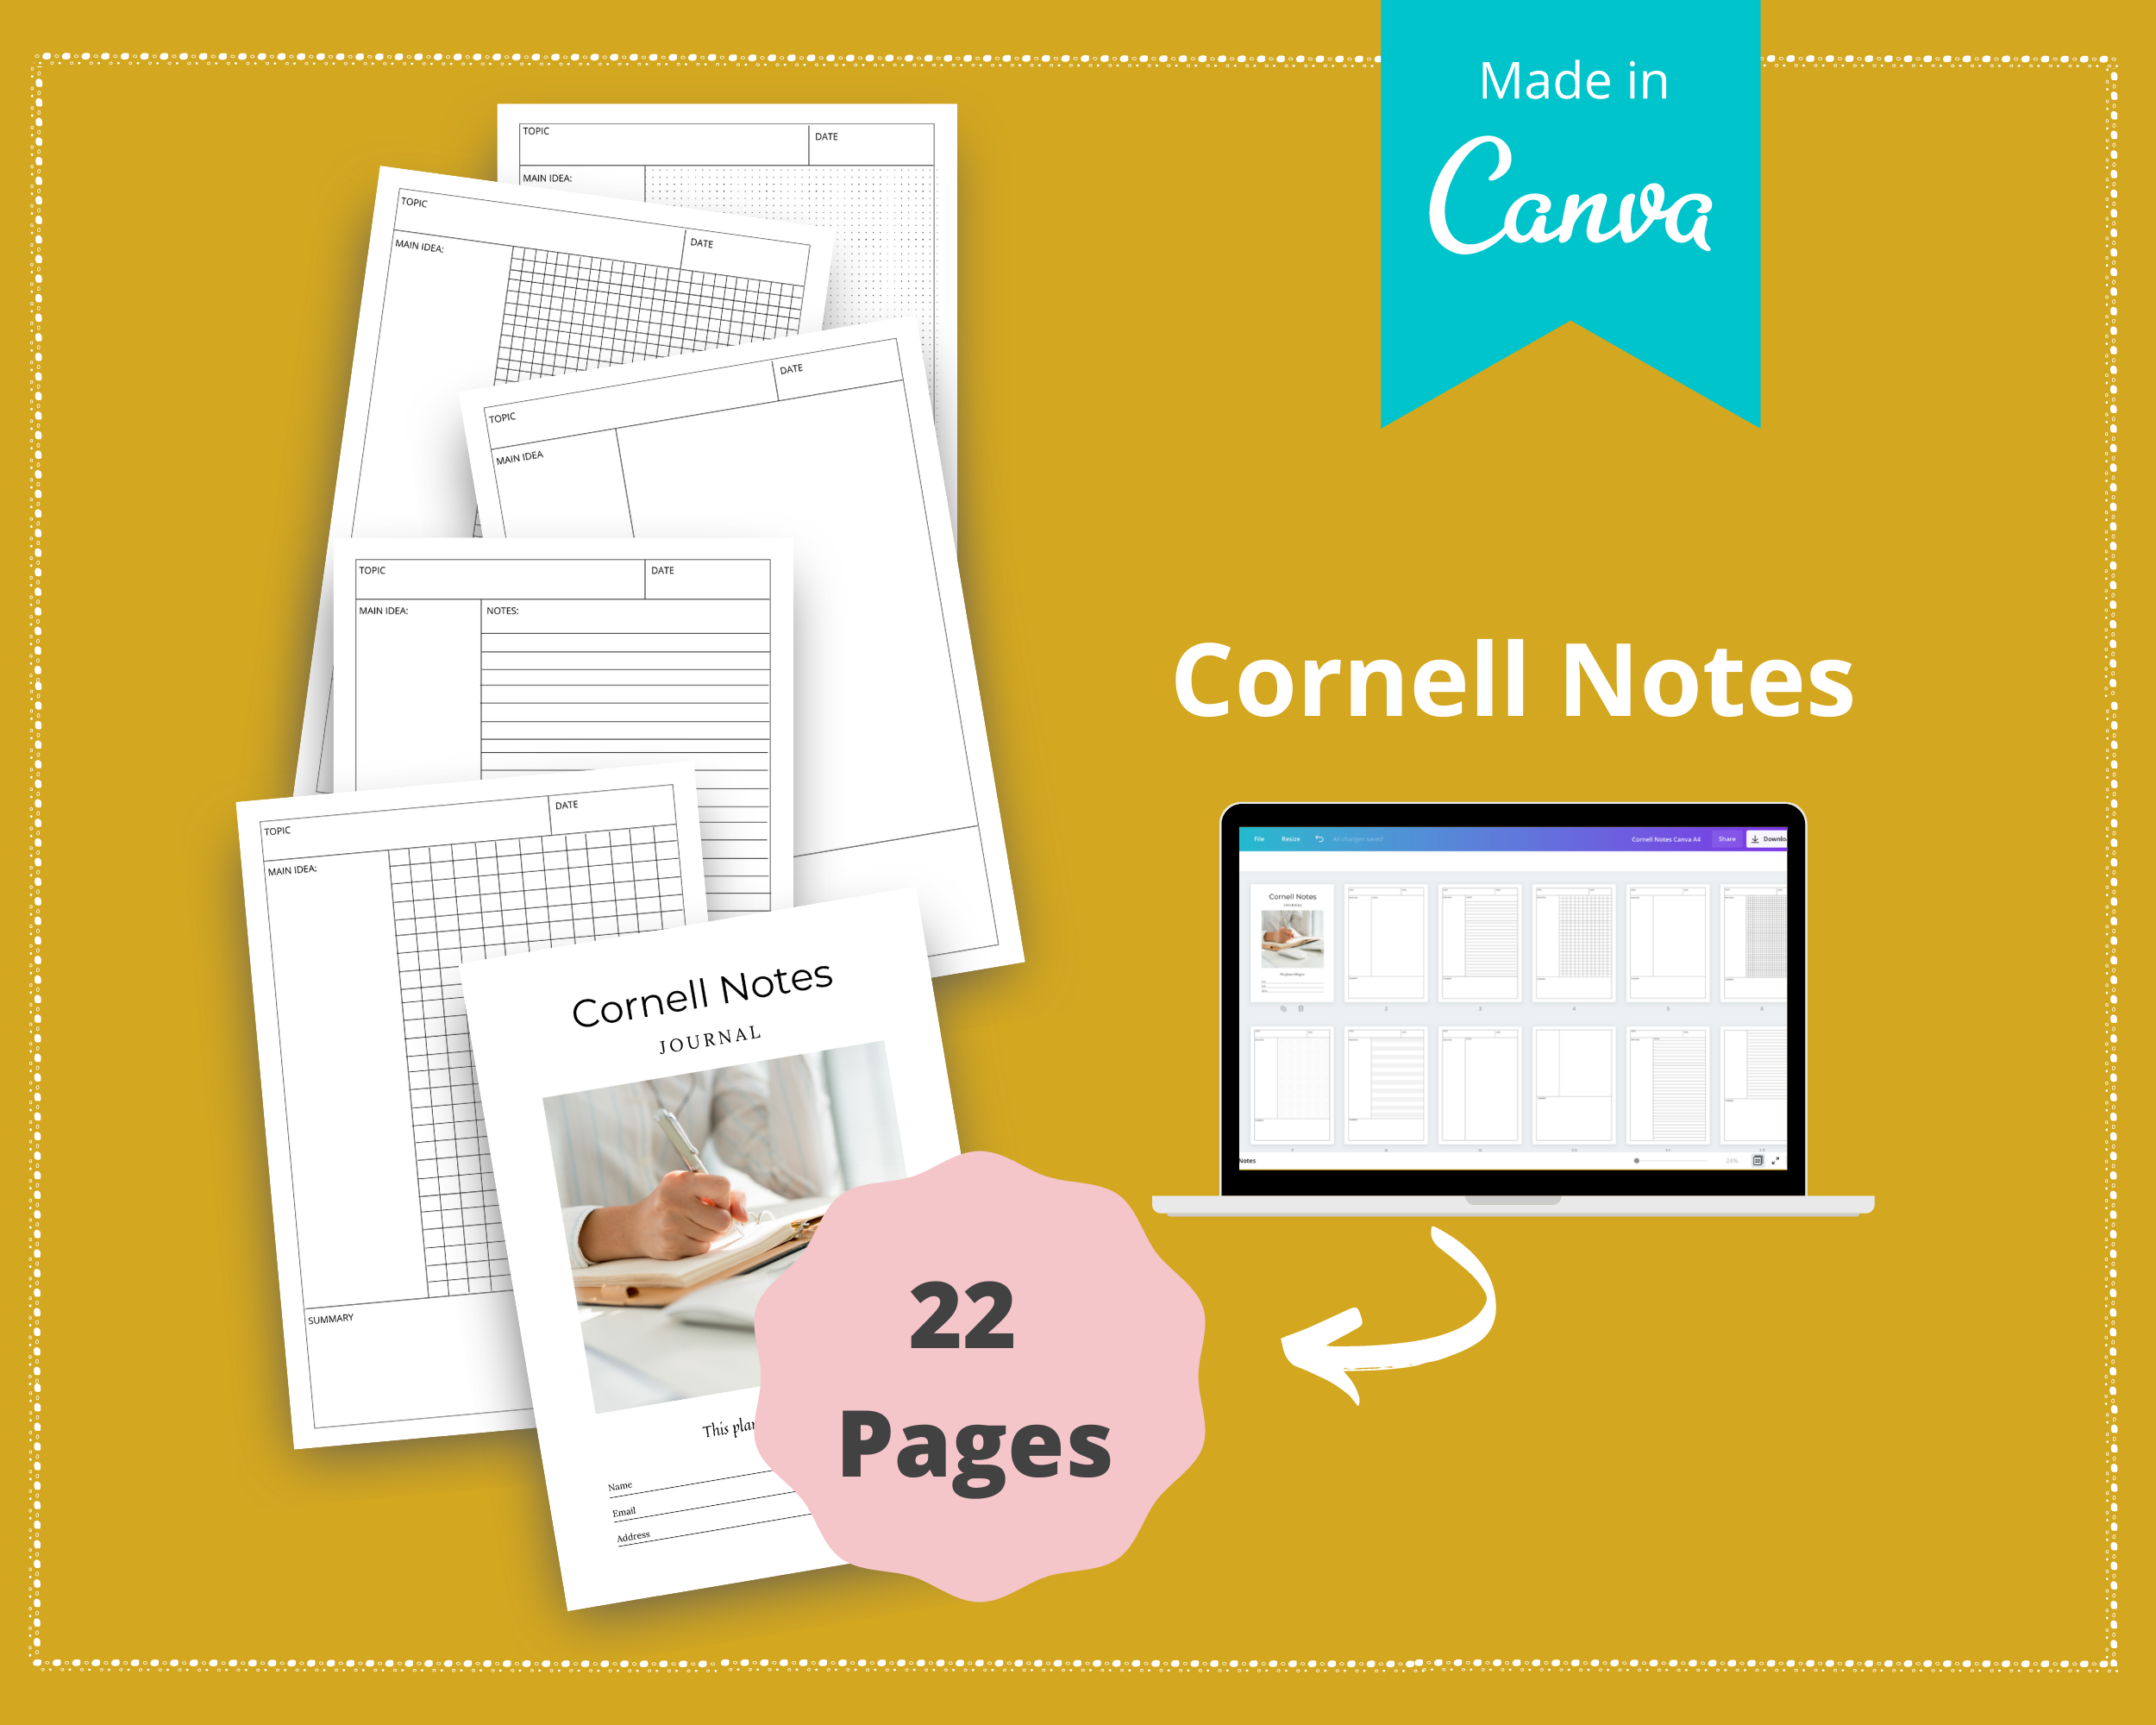 Editable Cornell Notes in Canva | Commercial Use